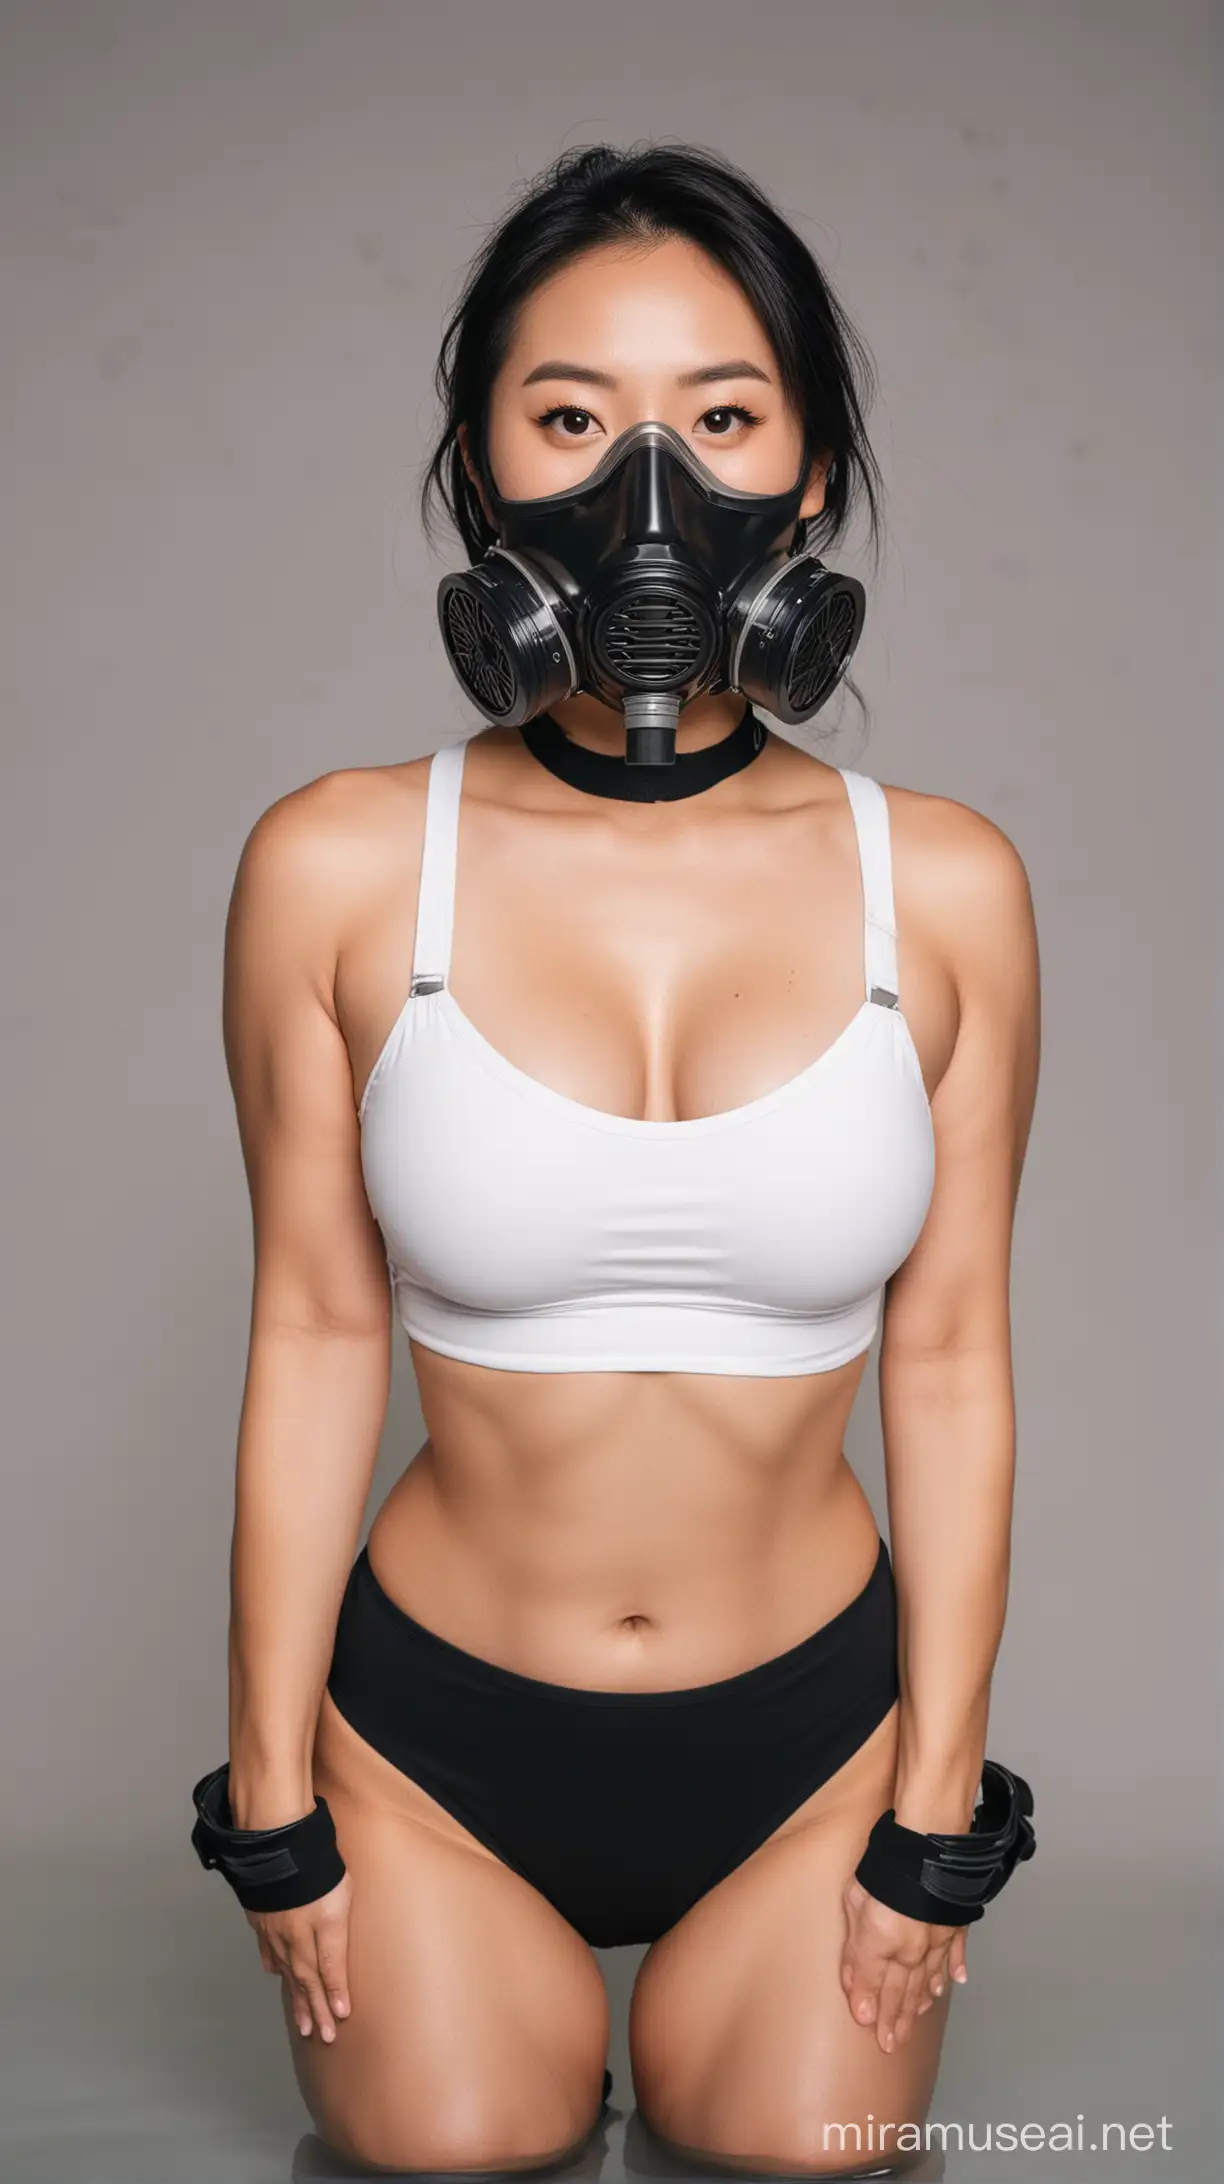 a bodacious asian woman in a white sports bra and black high-waisted swimsuit bottoms wearing a gas mask